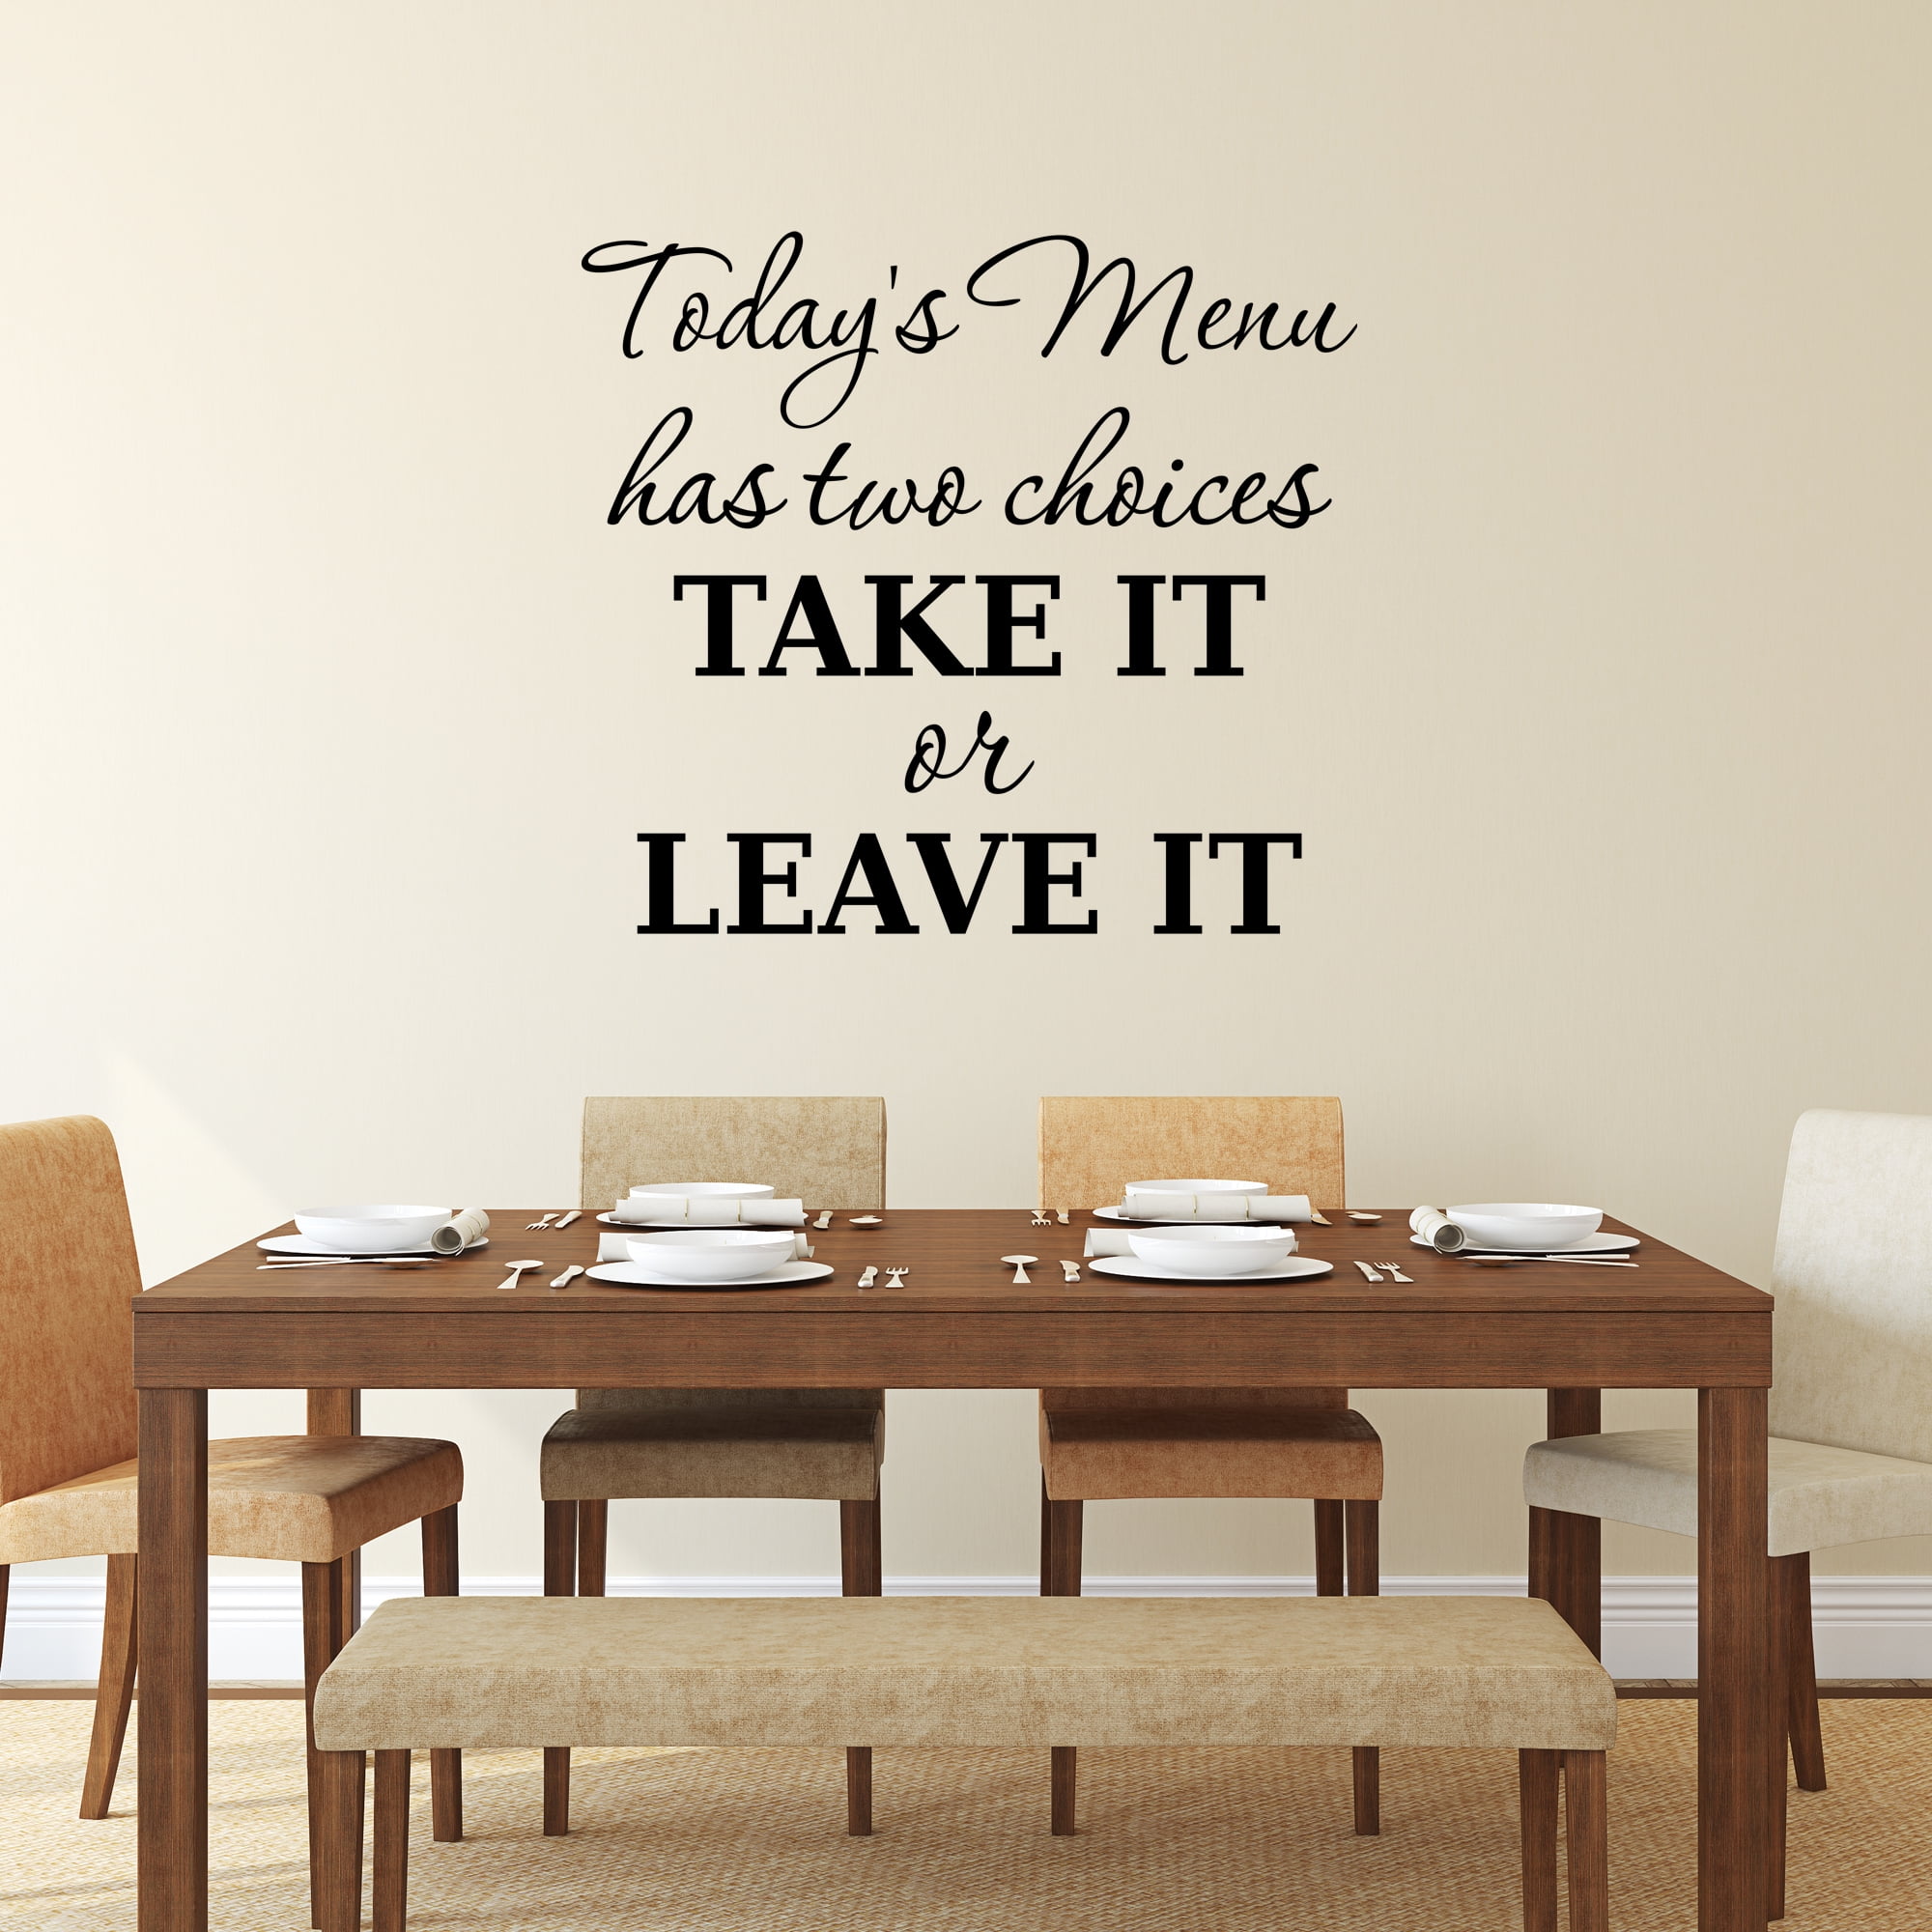 Kitchen Rules Quote Wall Sticker Fun Vinyl Art Transfer Dining Room Decor Decal 